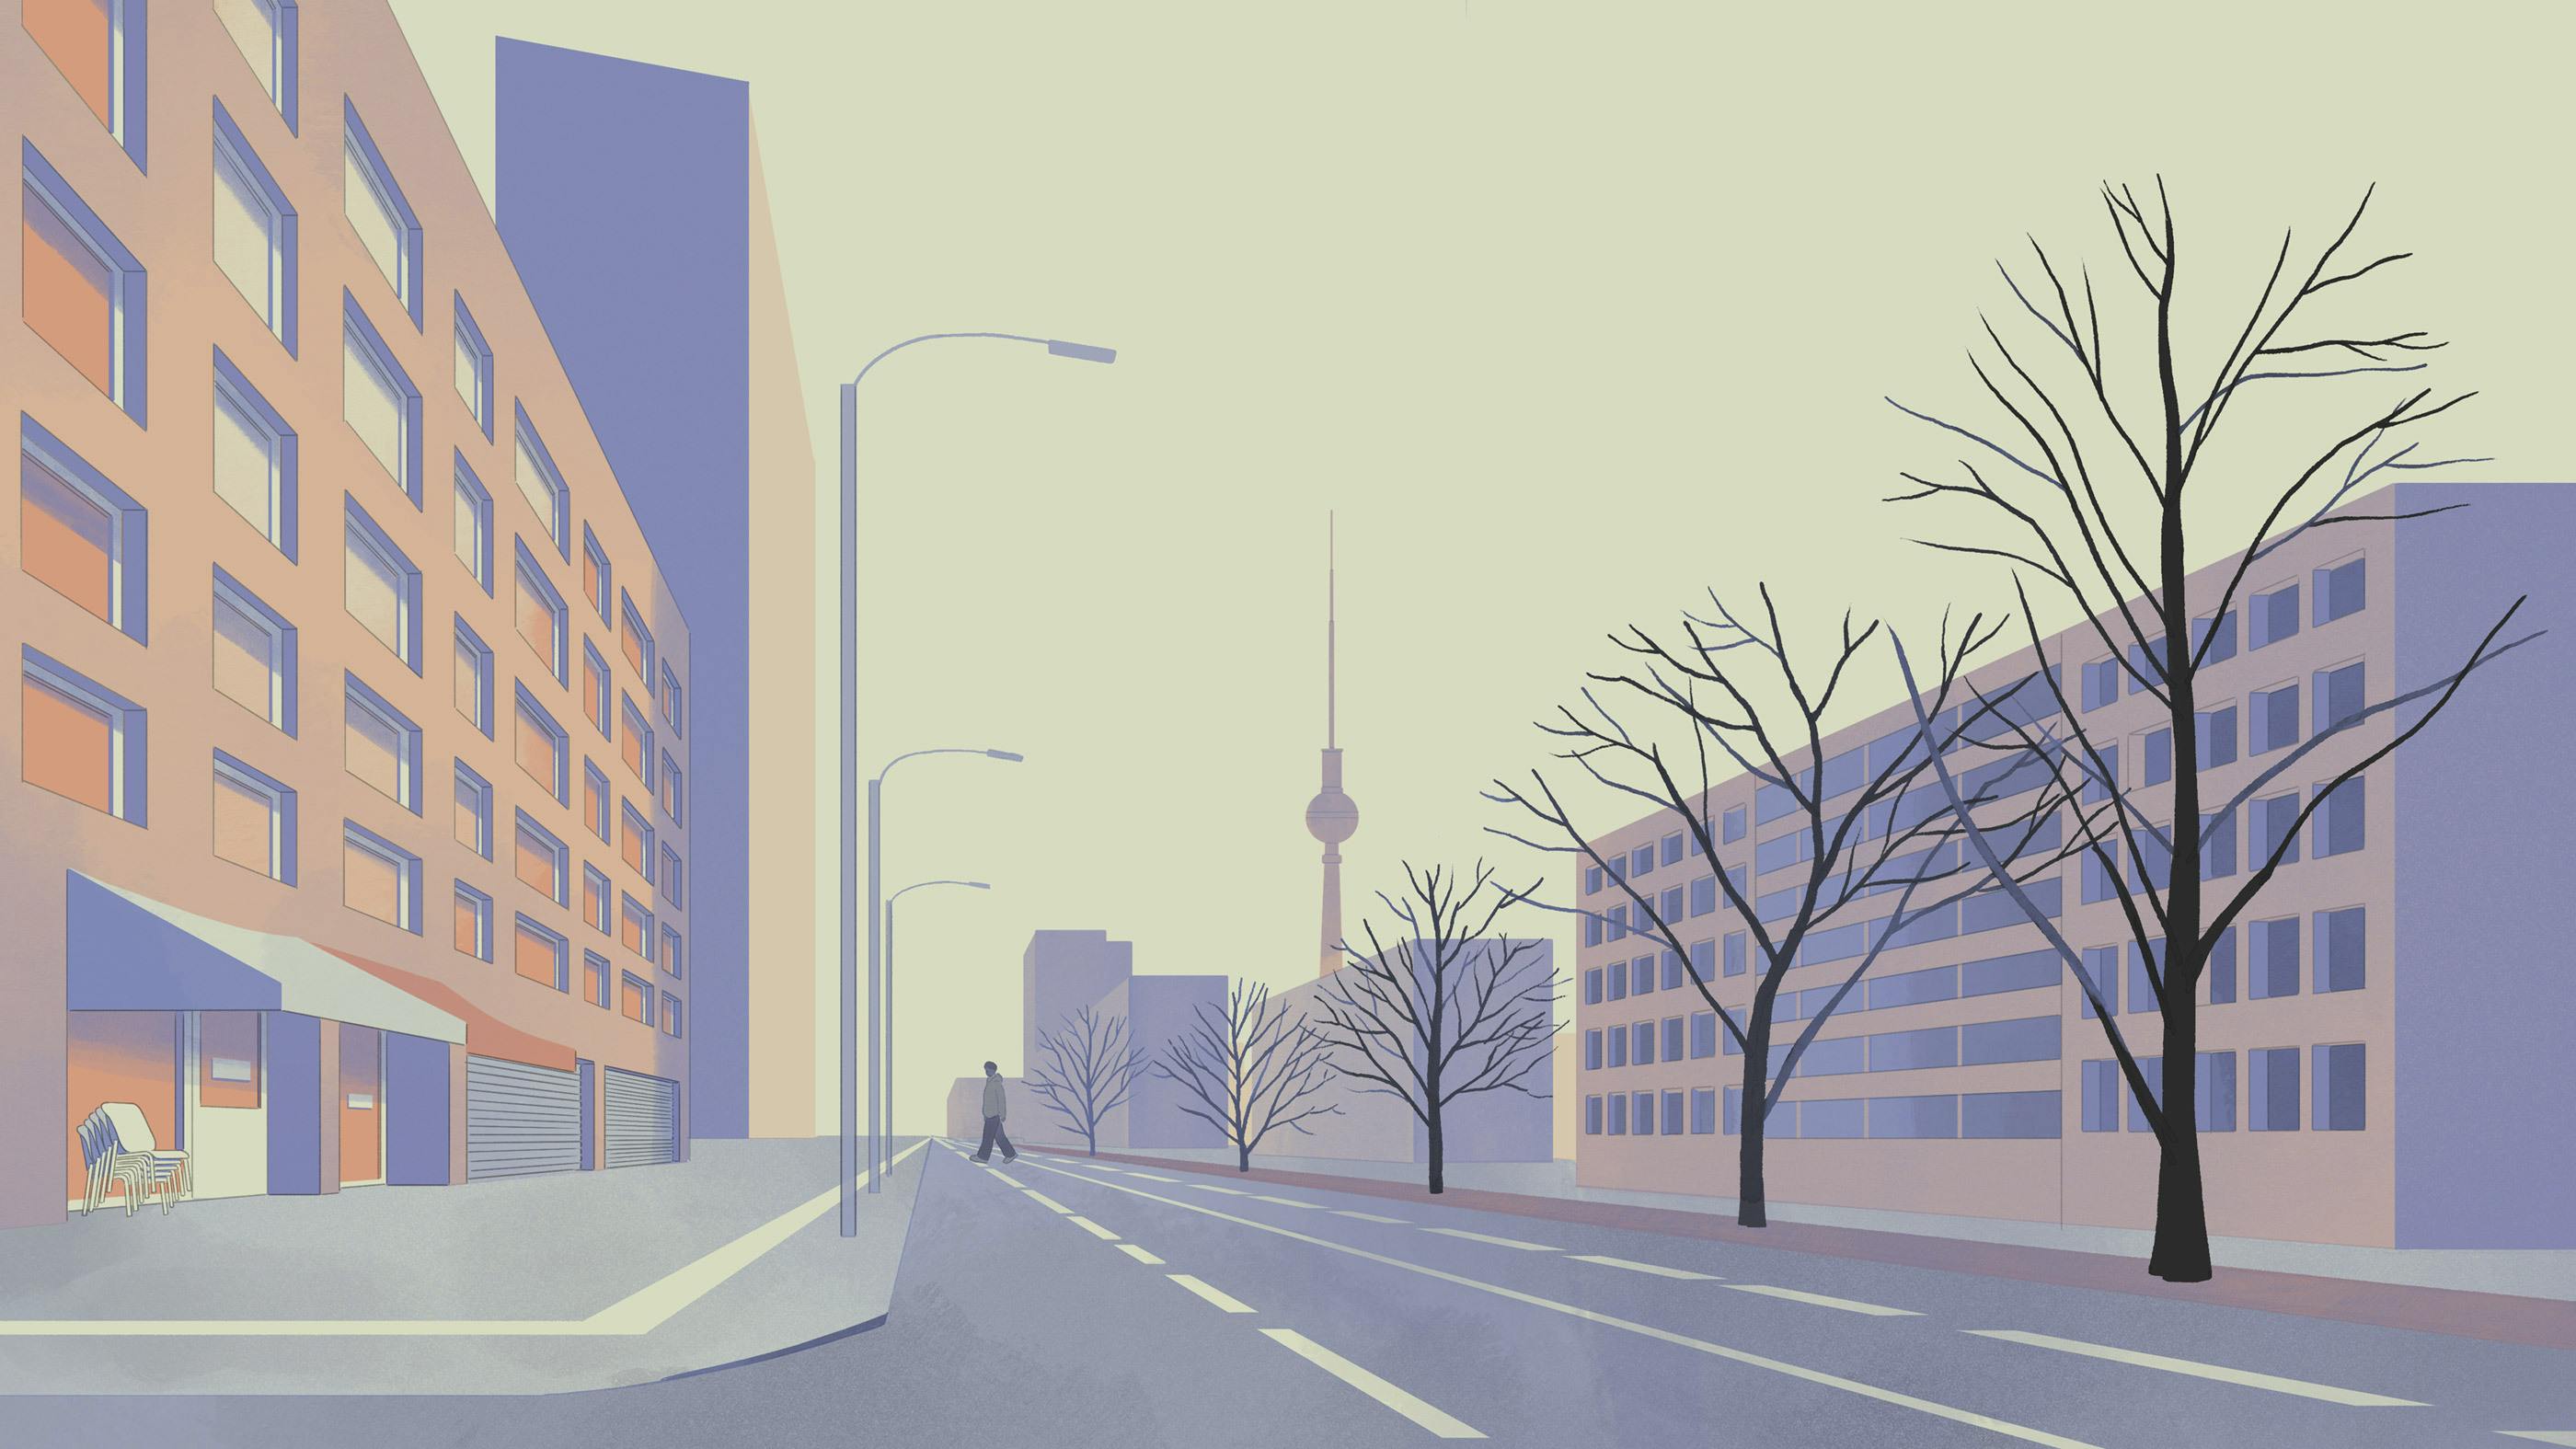 Buildings and a street in Berlin. Illustration by Jun Cen for prologue  a dark underground.